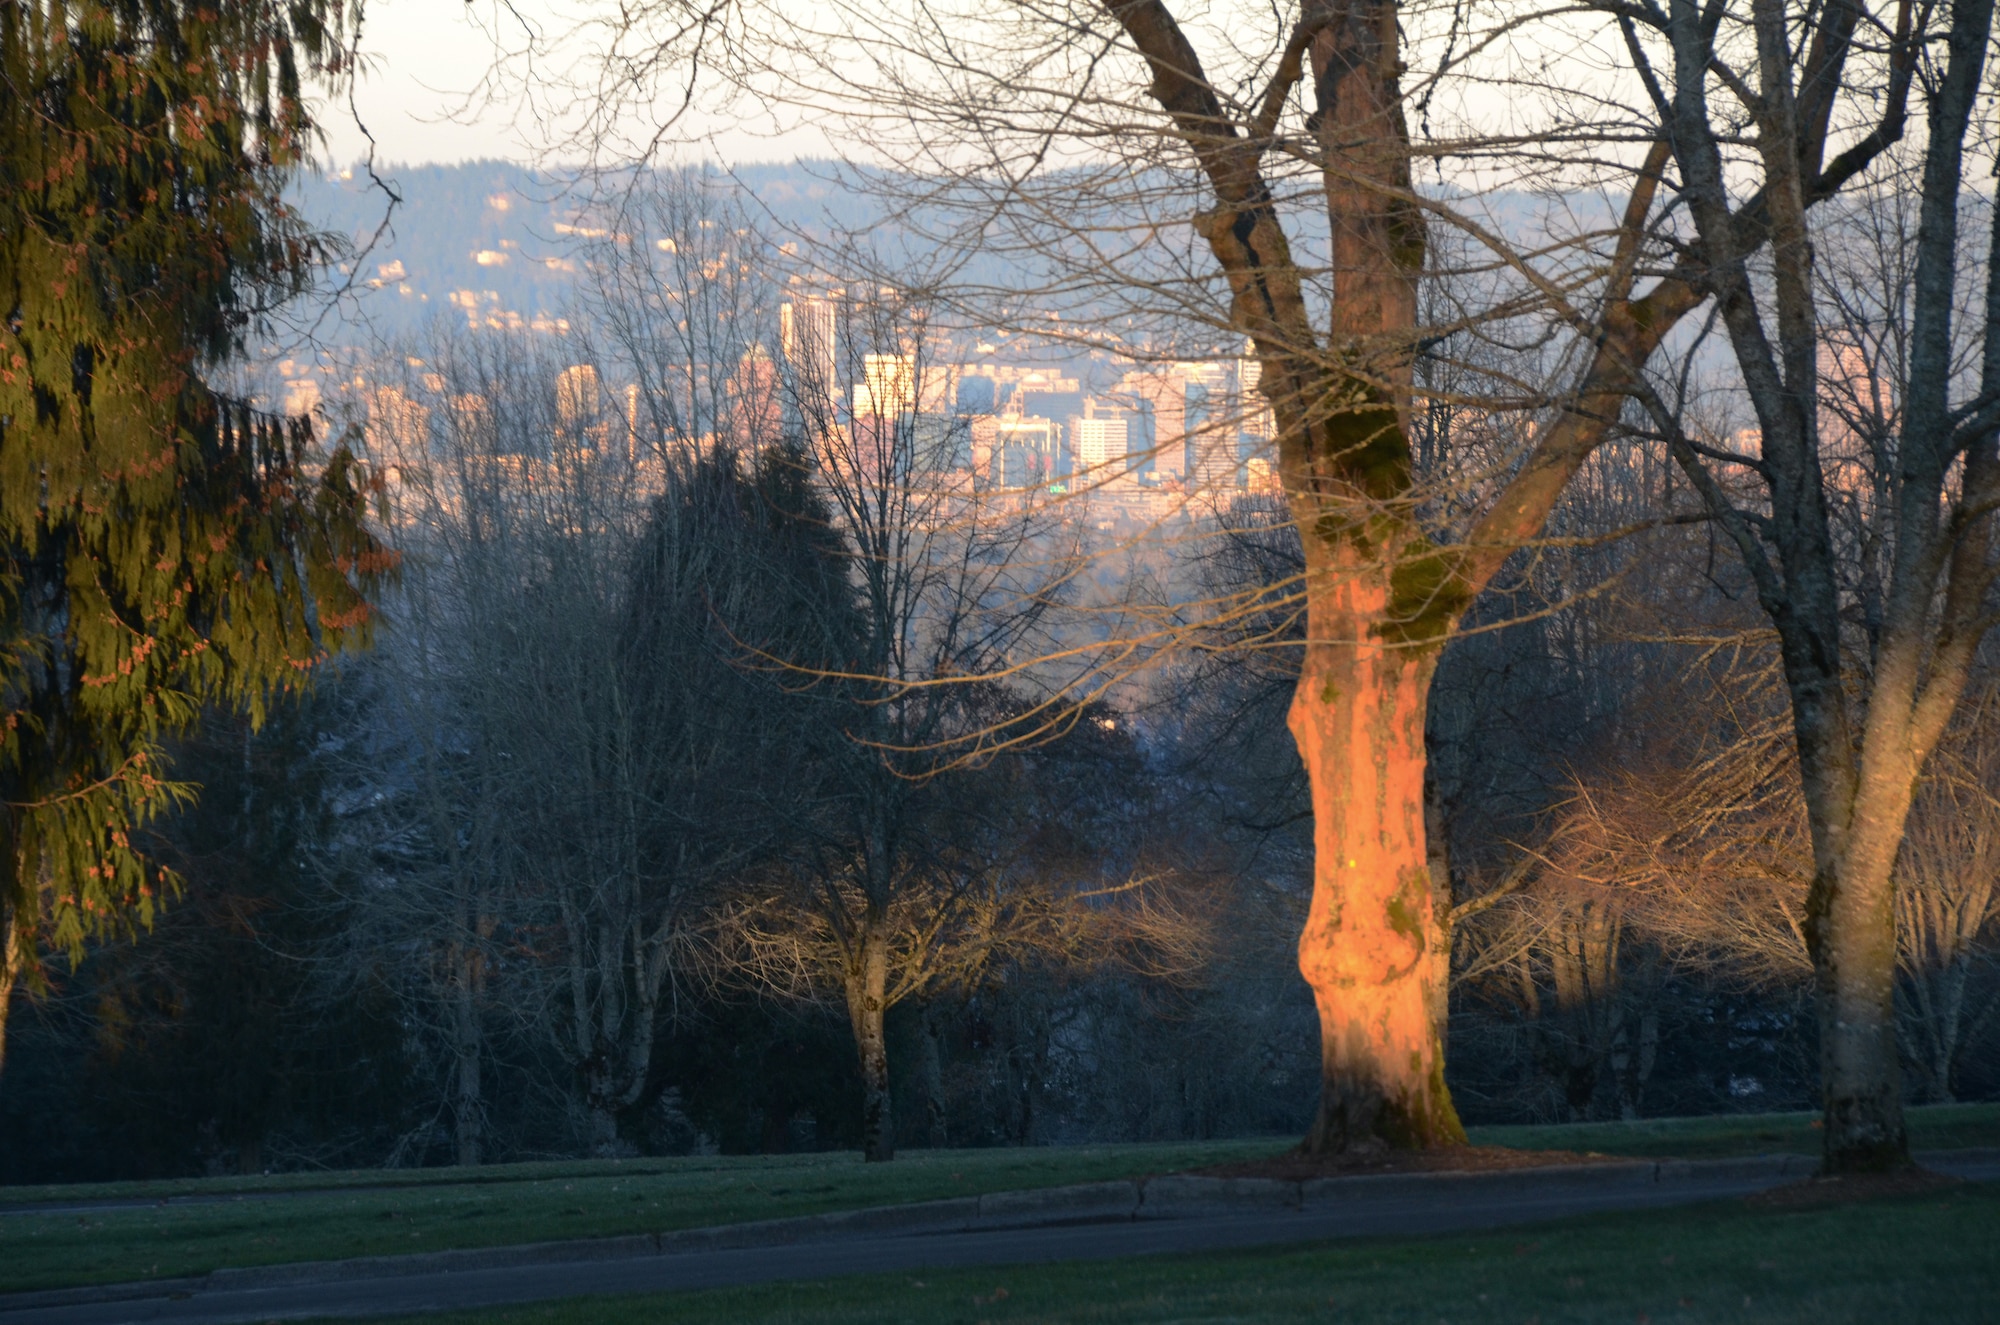 The city of Portland, Ore., in the distance, is illuminated through the tree line at Willamette National Cemetery, as the sun rises over the 307-acre burial grounds, about 10 miles southeast of the city center, Jan. 6, 2017. (U.S. Air National Guard photo by Tech. Sgt. John Hughel, 142nd Fighter Wing Public Affairs) 